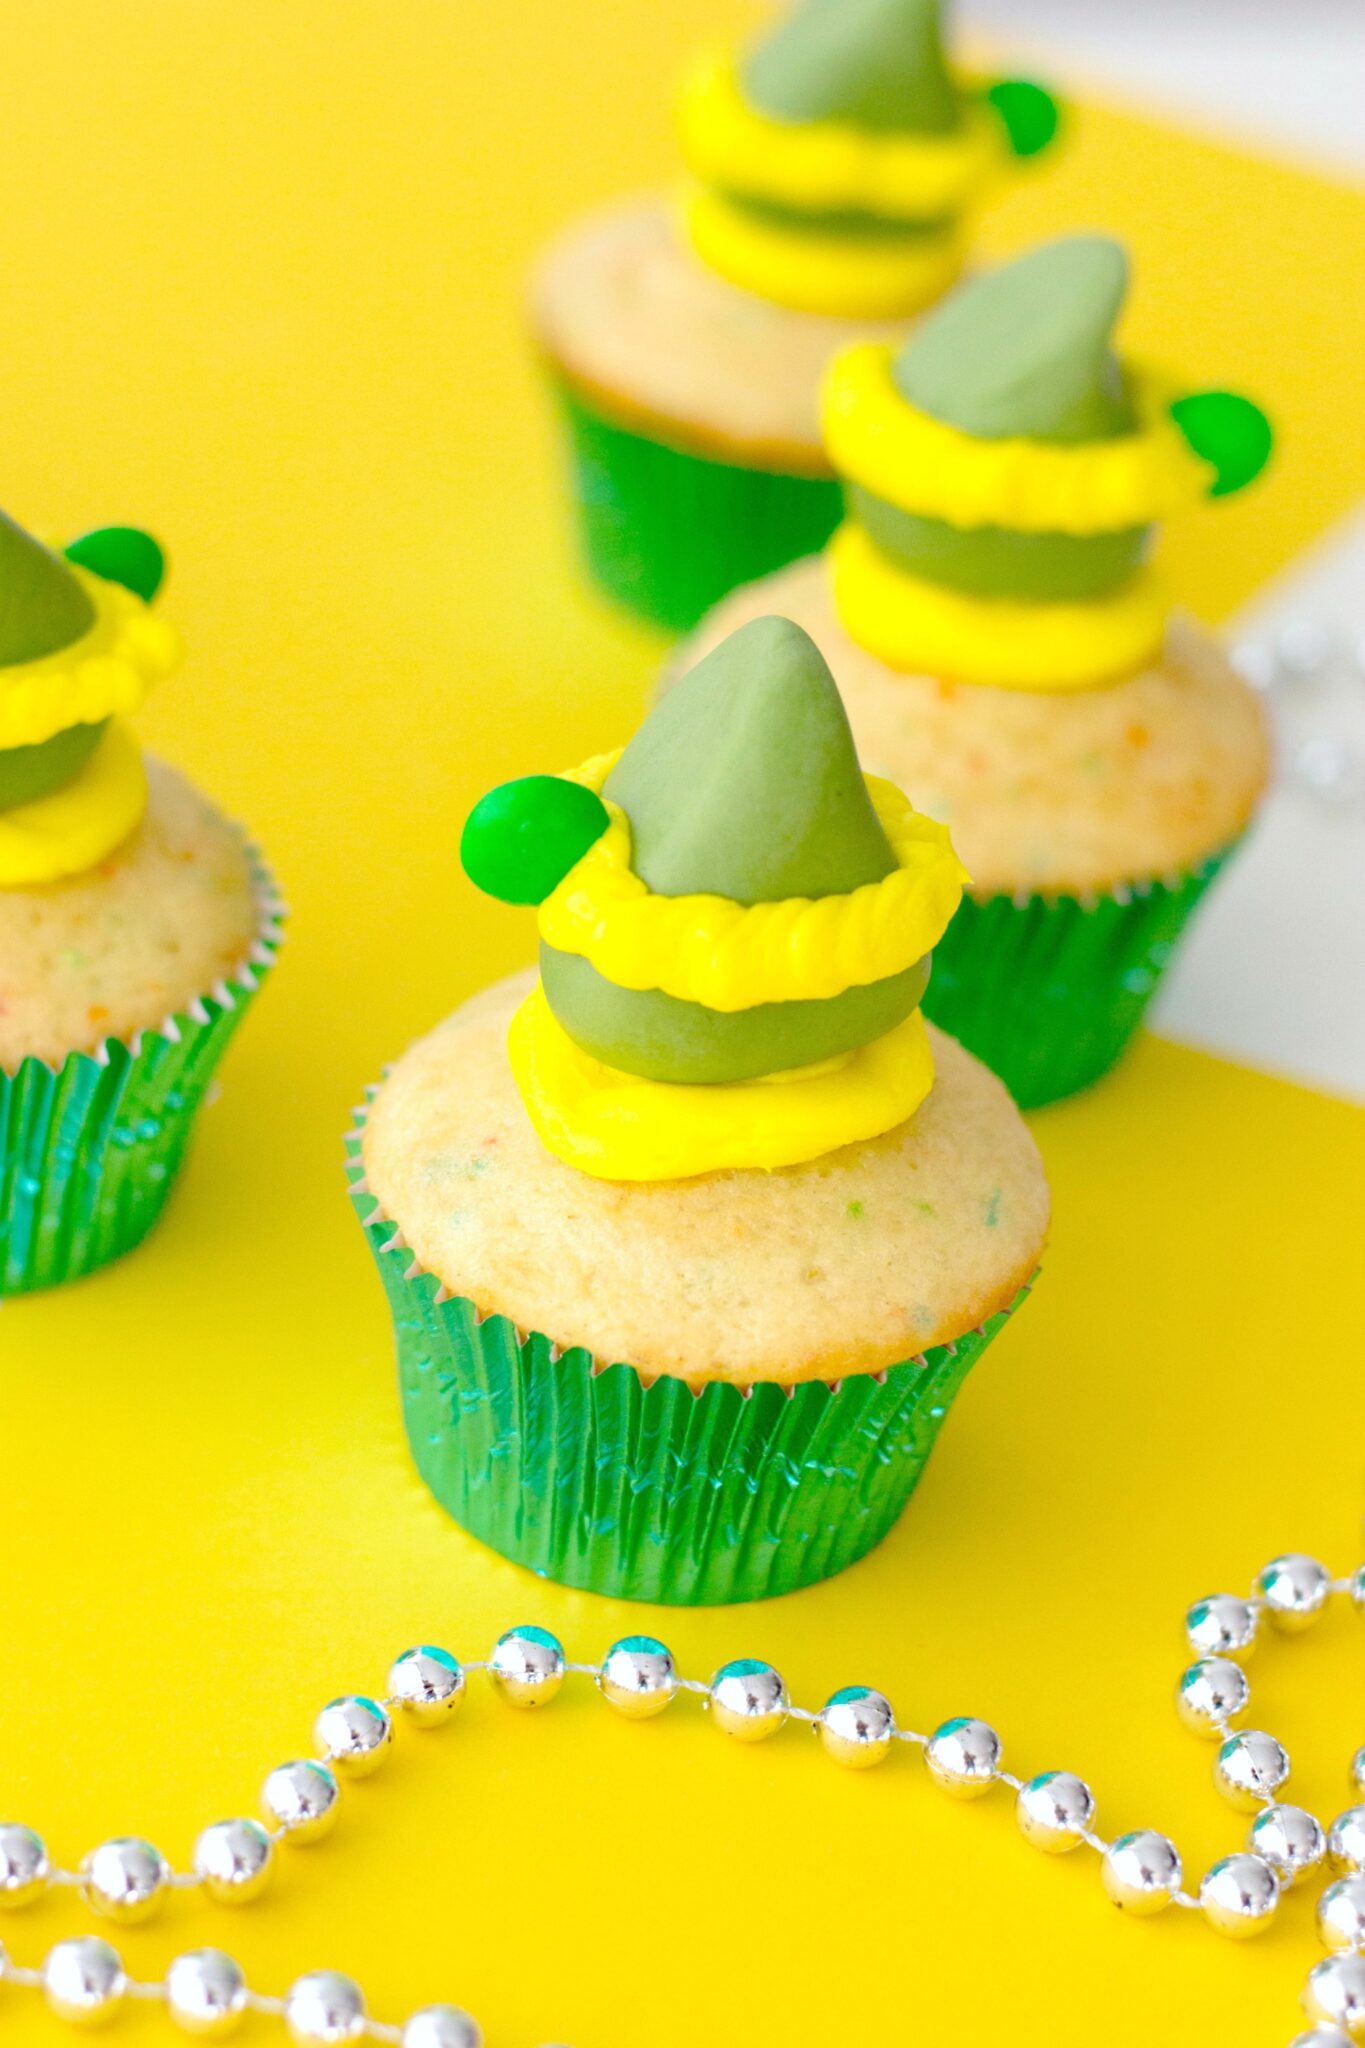 Buddy the Elf inspired funfetti cupcakes on a yellow table with silver garland.